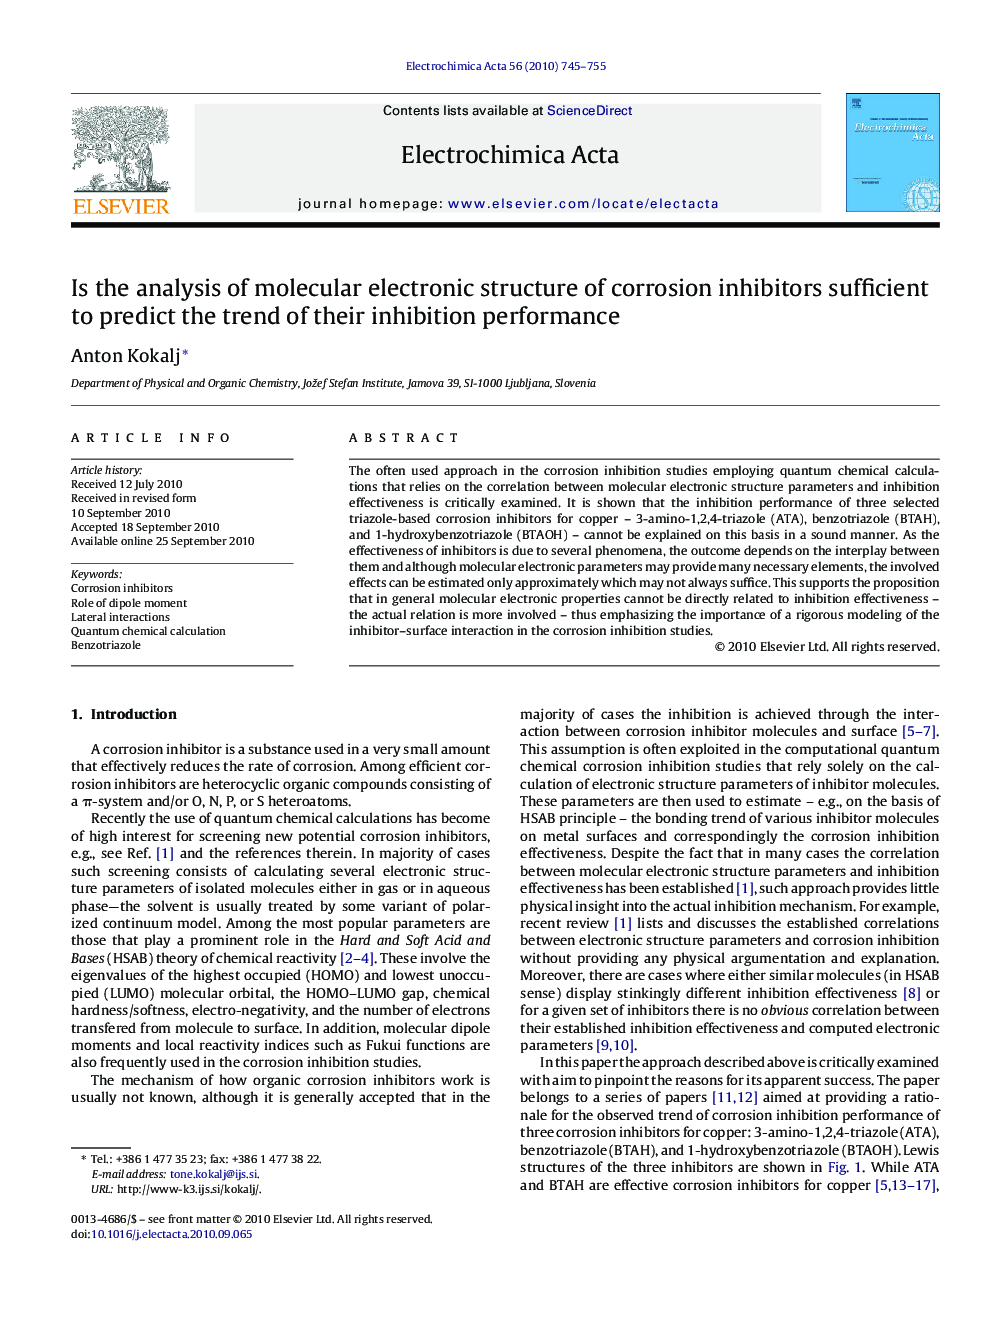 Is the analysis of molecular electronic structure of corrosion inhibitors sufficient to predict the trend of their inhibition performance